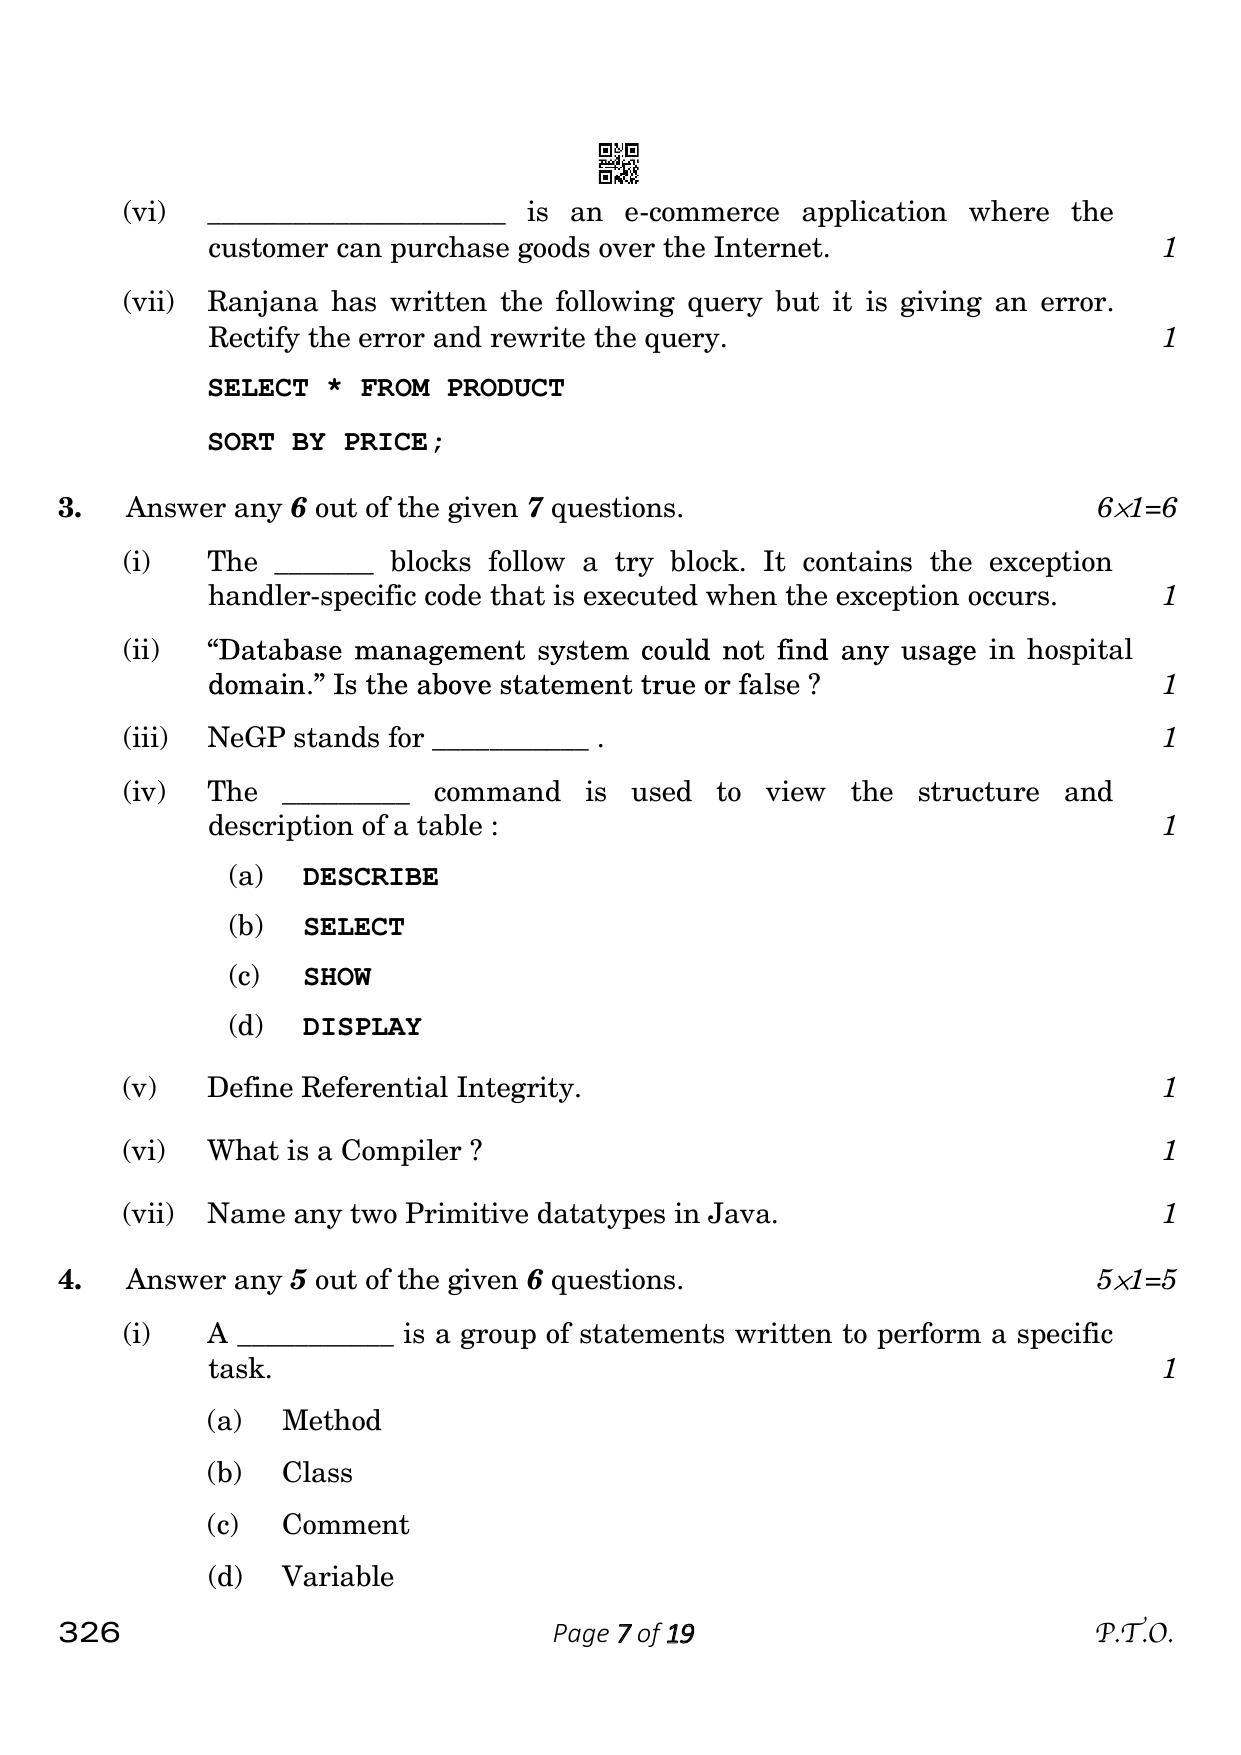 CBSE Class 12 326_Information Technology 2023 Question Paper - Page 7